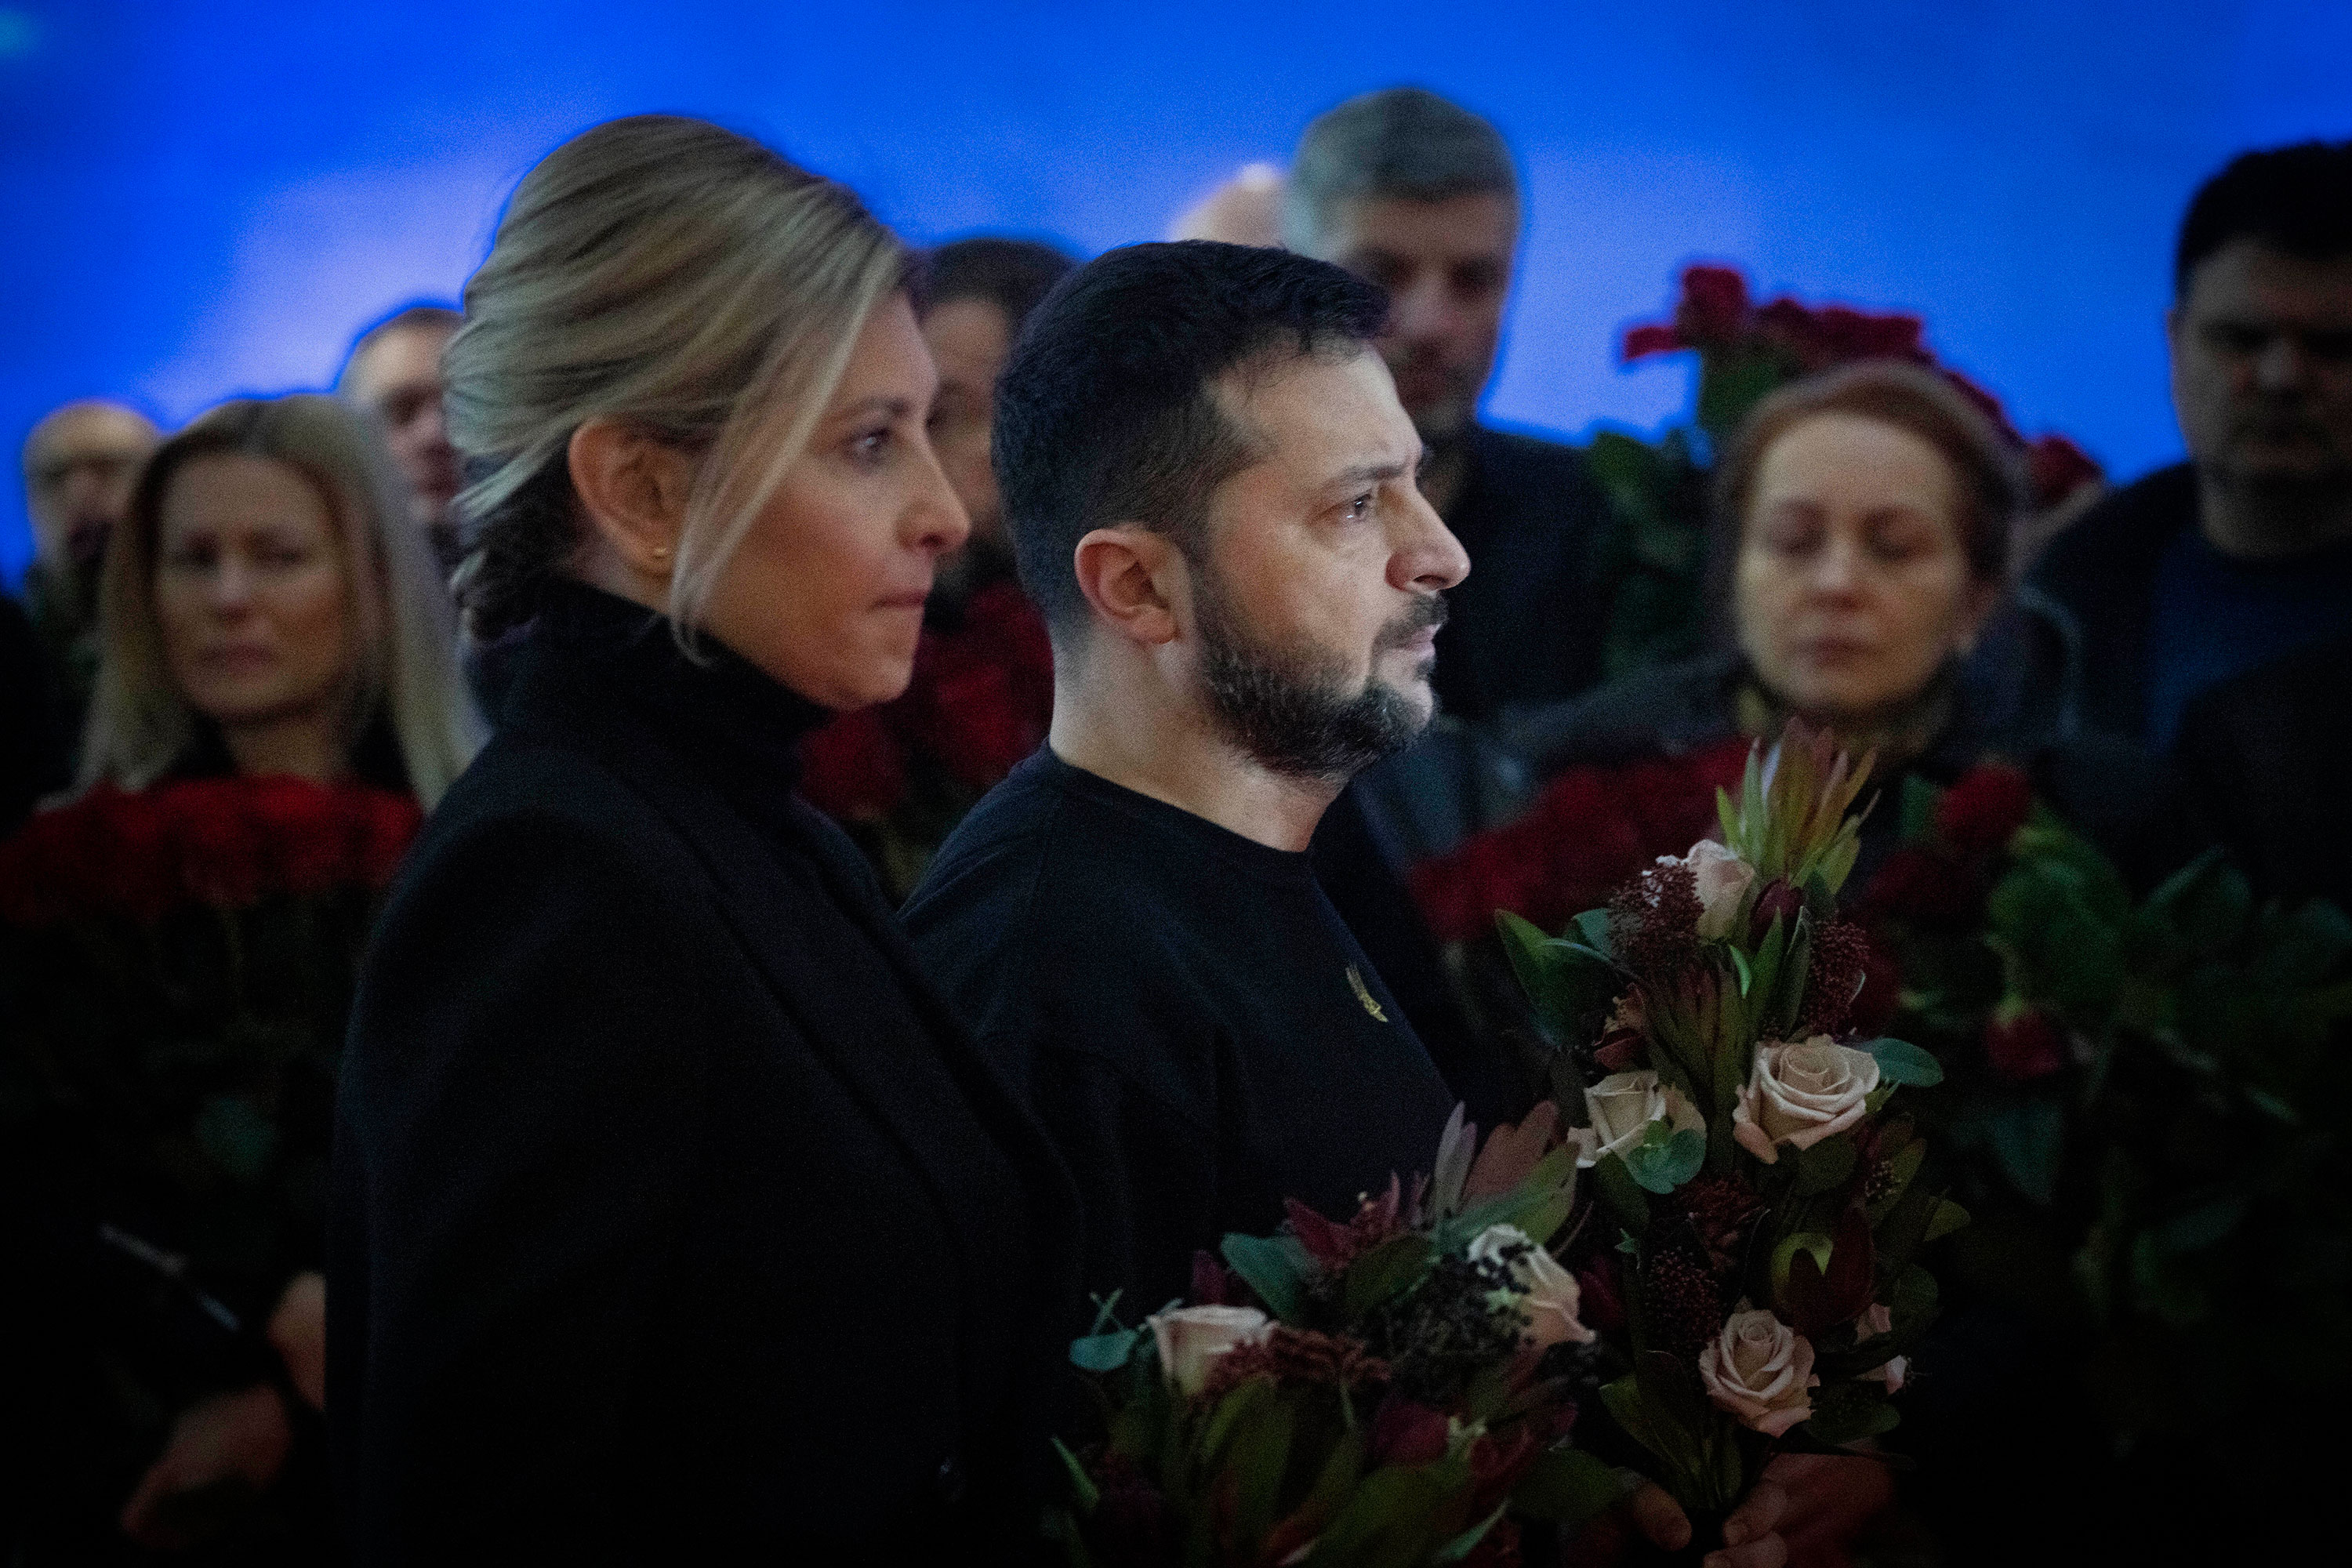 Ukrainian President Volodymyr Zelensky and his wife Olena pay their respects to victims of a deadly helicopter crash during a farewell ceremony Saturday in Kyiv.